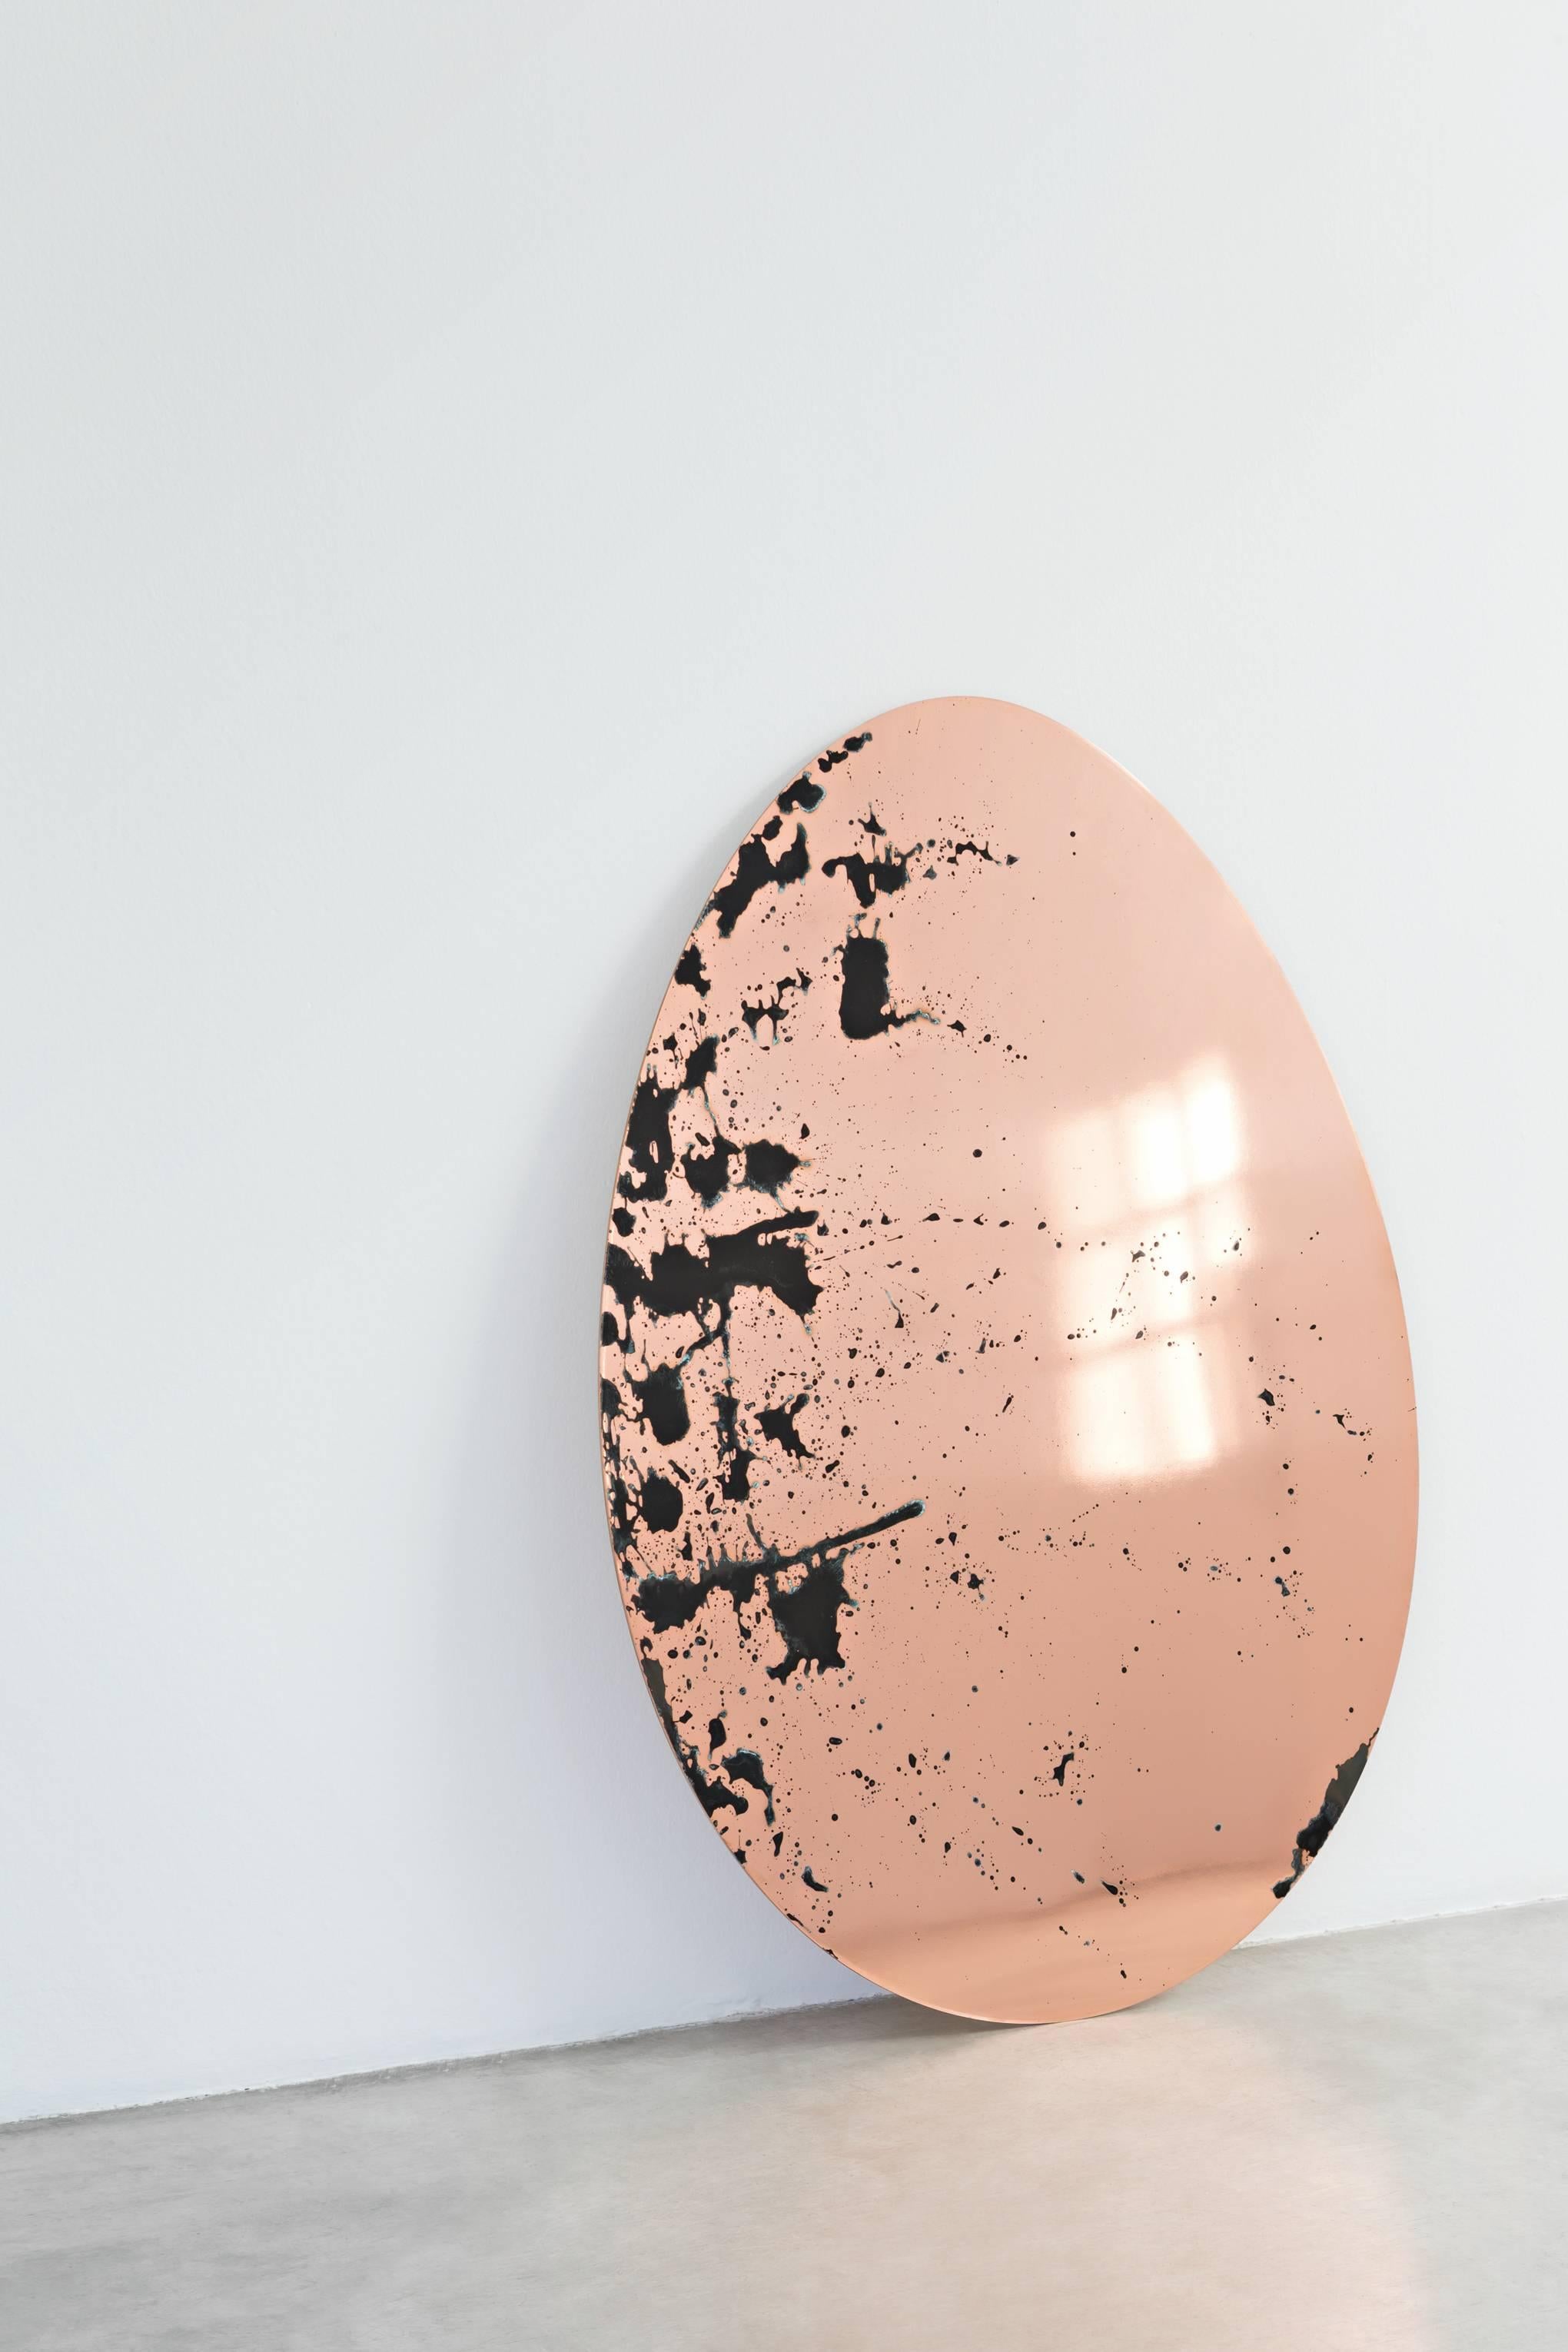 Contemporary Big Oval Mirrors, Model SFG 12-L, Limited Edition of 5 For Sale